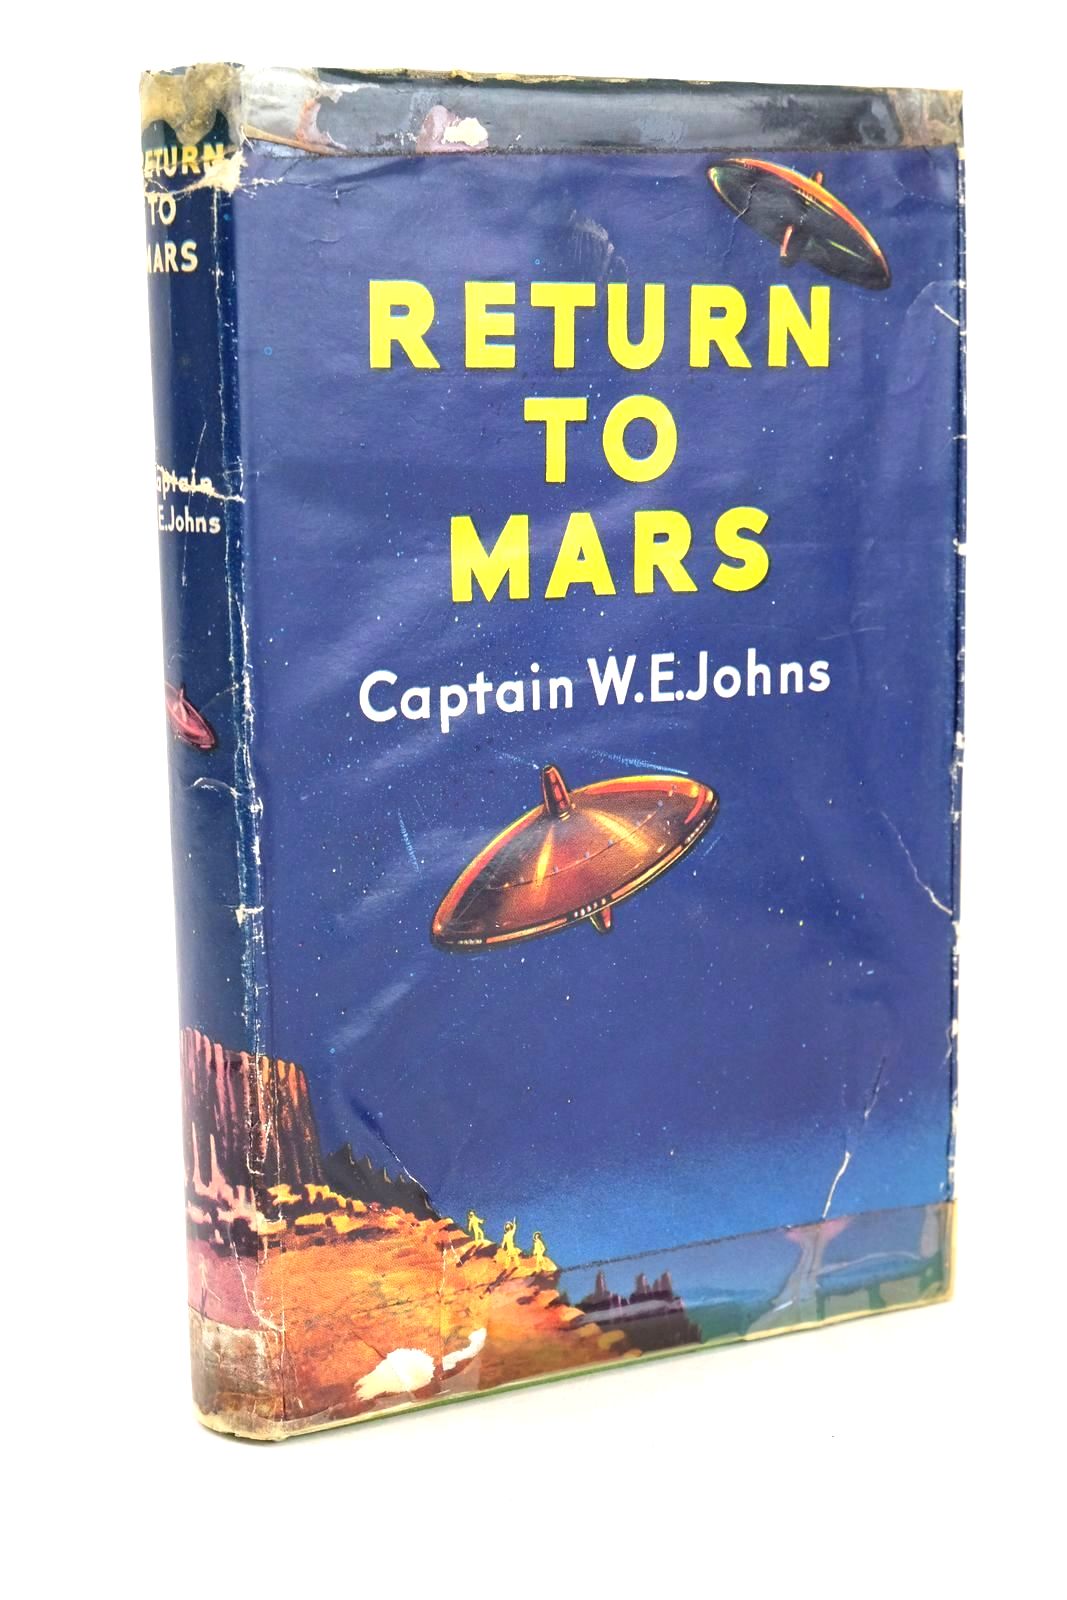 Photo of RETURN TO MARS written by Johns, W.E. illustrated by Stead,  published by The Children's Book Club (STOCK CODE: 1326282)  for sale by Stella & Rose's Books